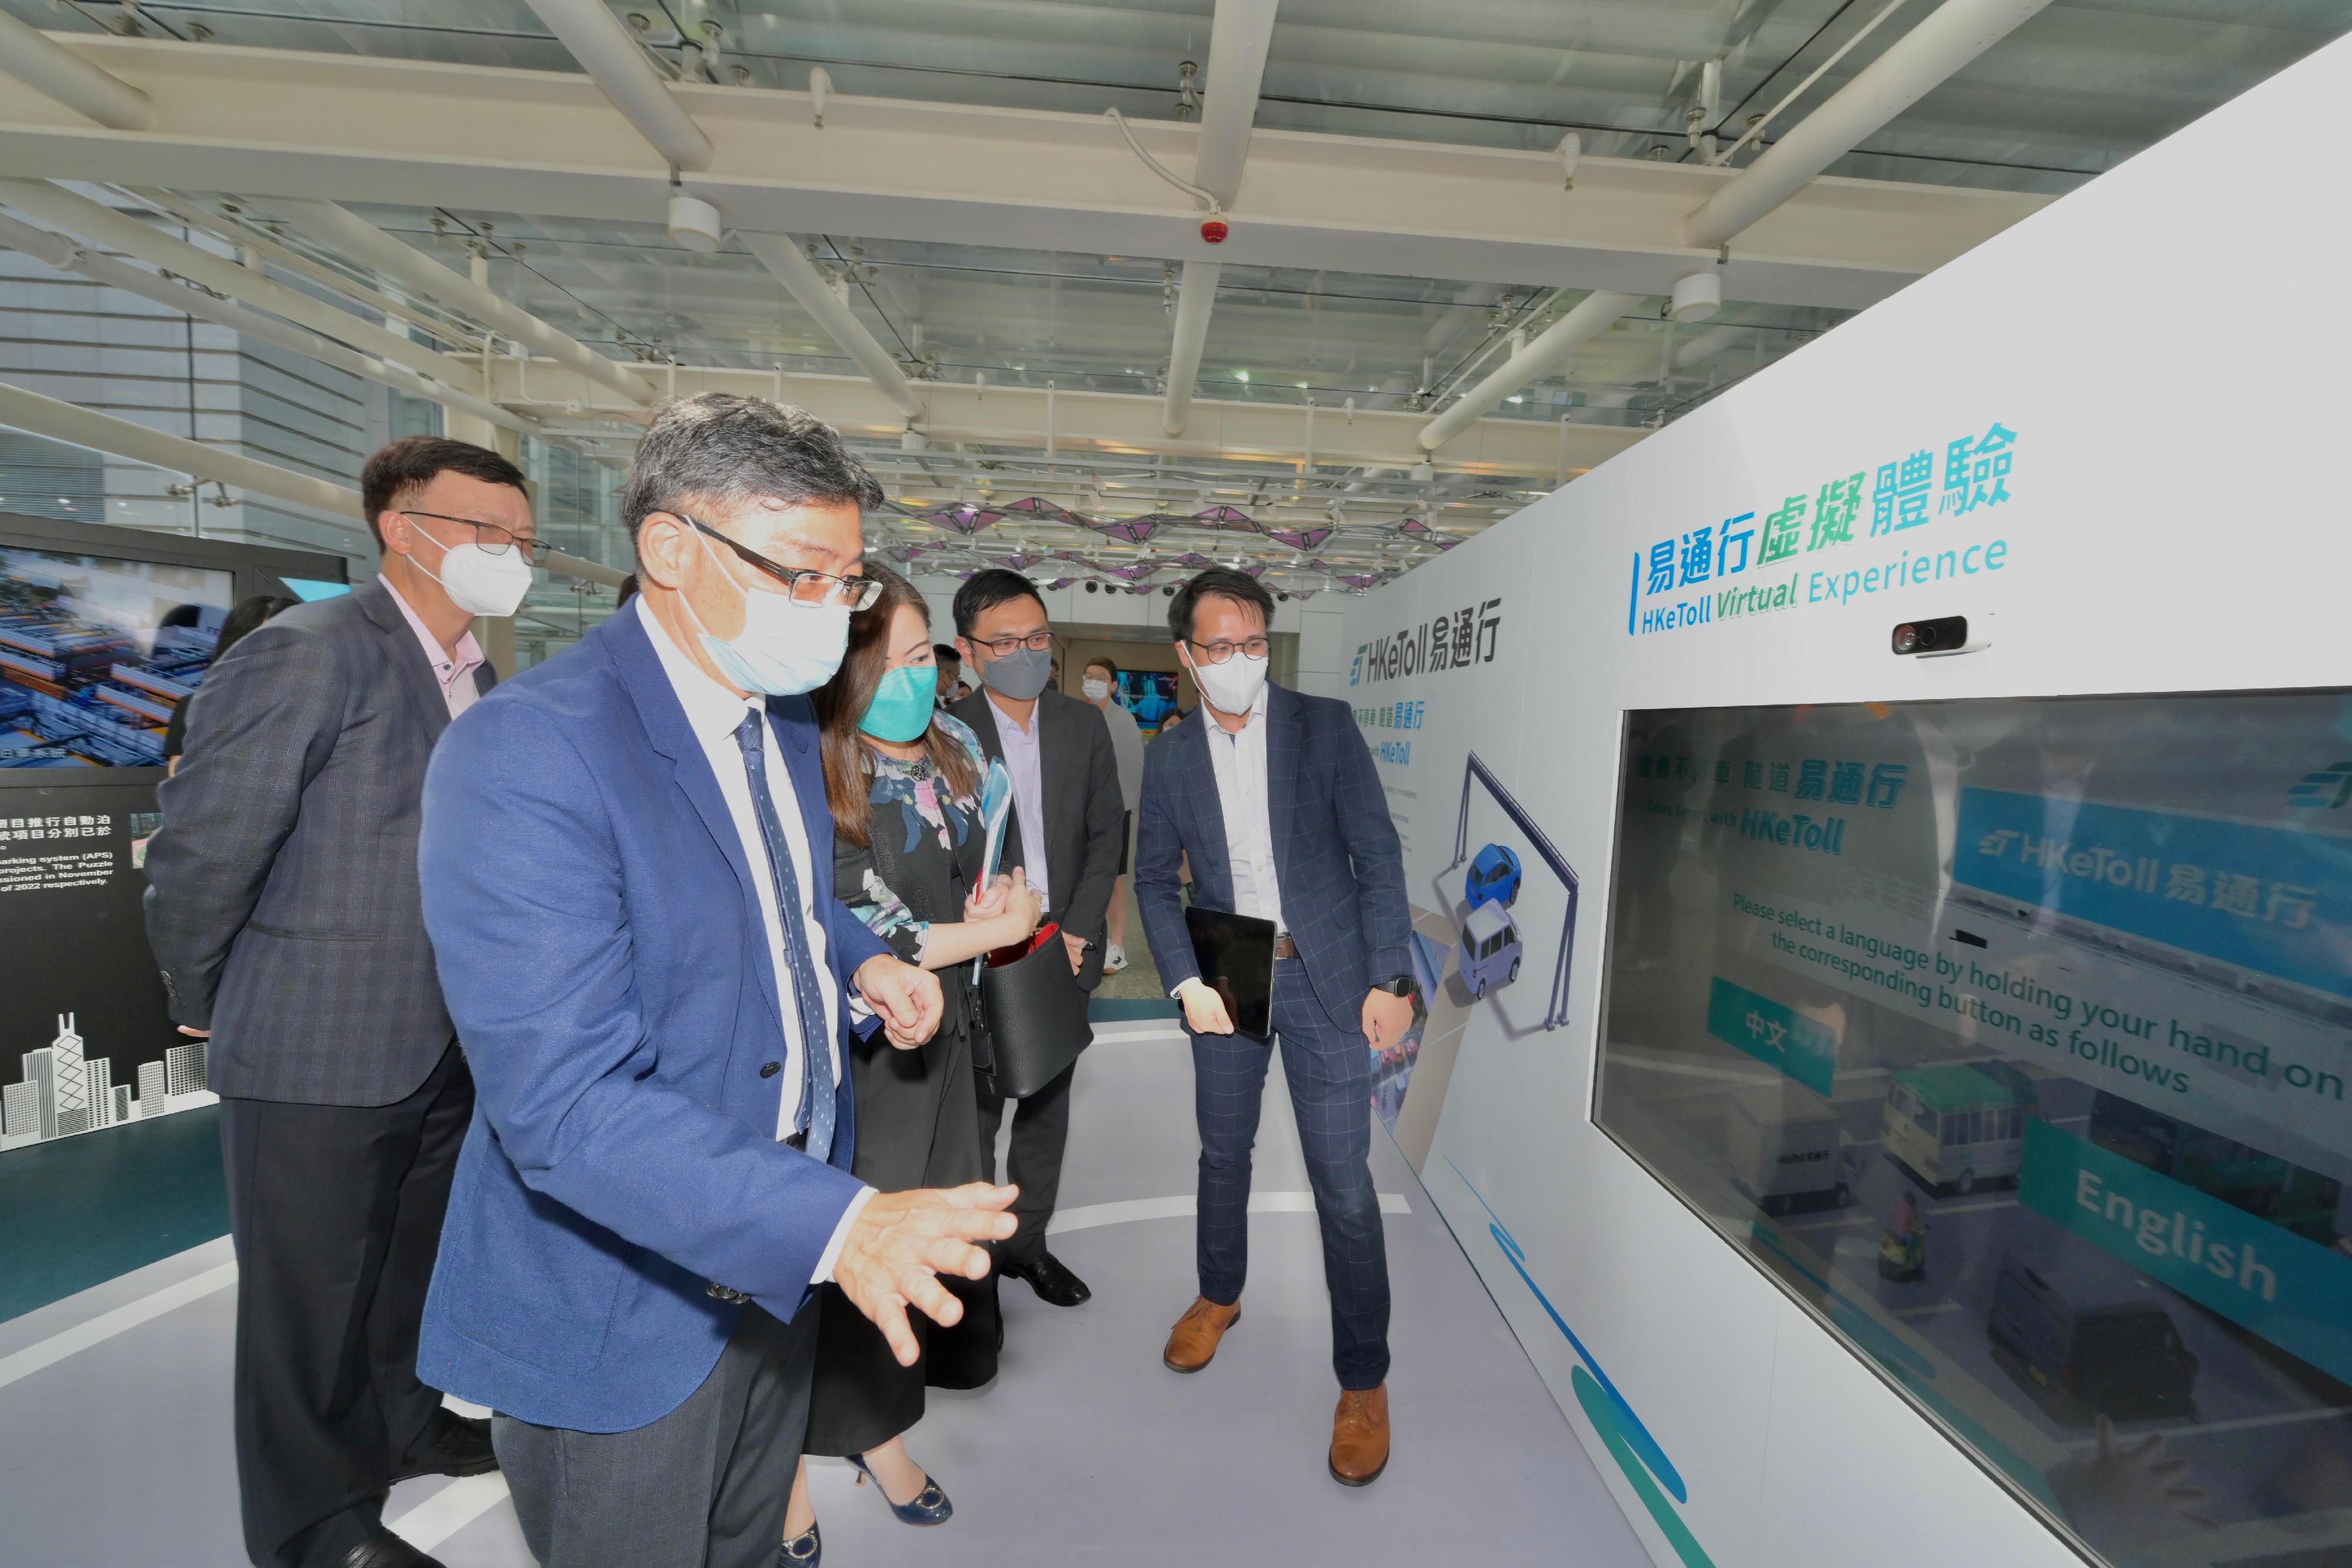 The Secretary for Transport and Logistics, Mr Lam Sai-hung, toured the "Journey Smart" roving exhibition held by the Transport Department at the Hong Kong Science Park. Photo shows Mr Lam (second left) trying out an interactive game which showcases the "HKeToll" service. Also present are the Under Secretary for Transport and Logistics, Mr Liu Chun-san (first left), and the Commissioner for Transport, Miss Rosanna Law (third left).